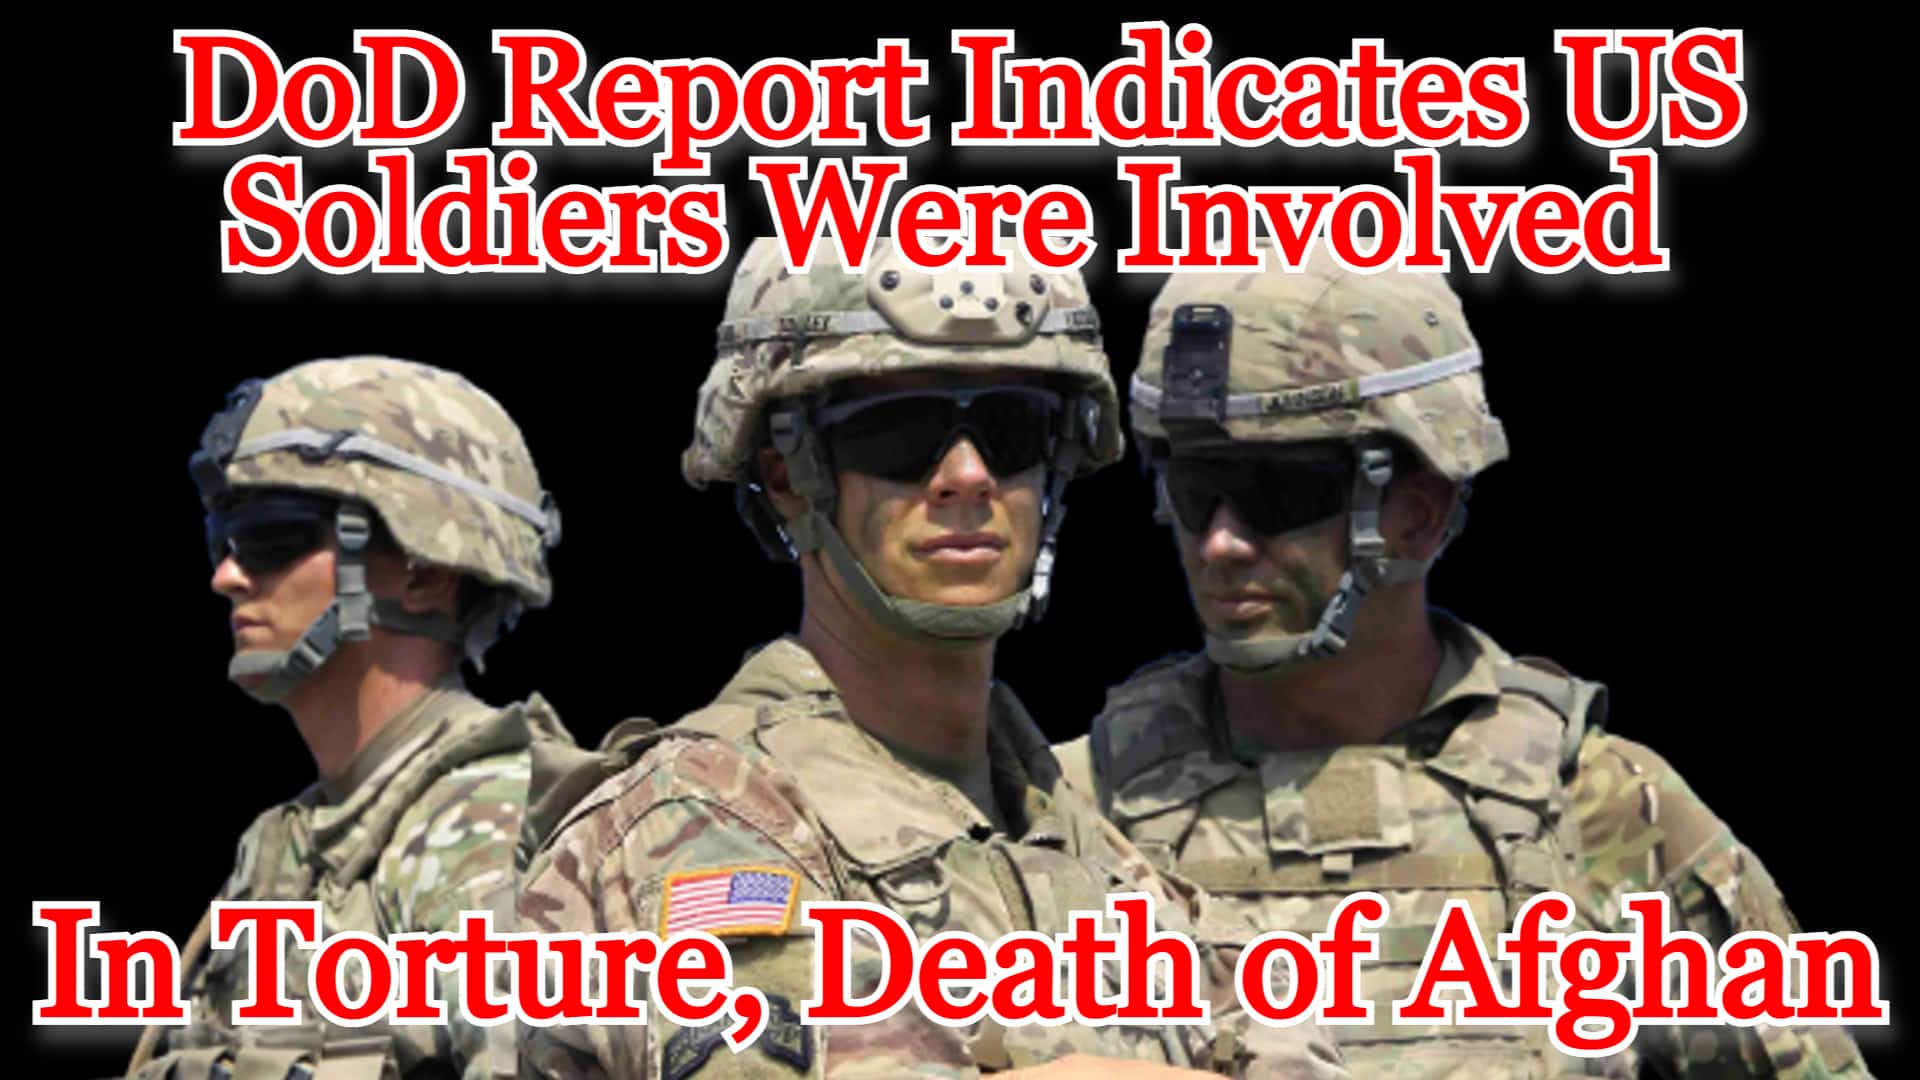 COI #257: DoD Report Indicates US Soldiers Were Involved Torture, Death of Afghan